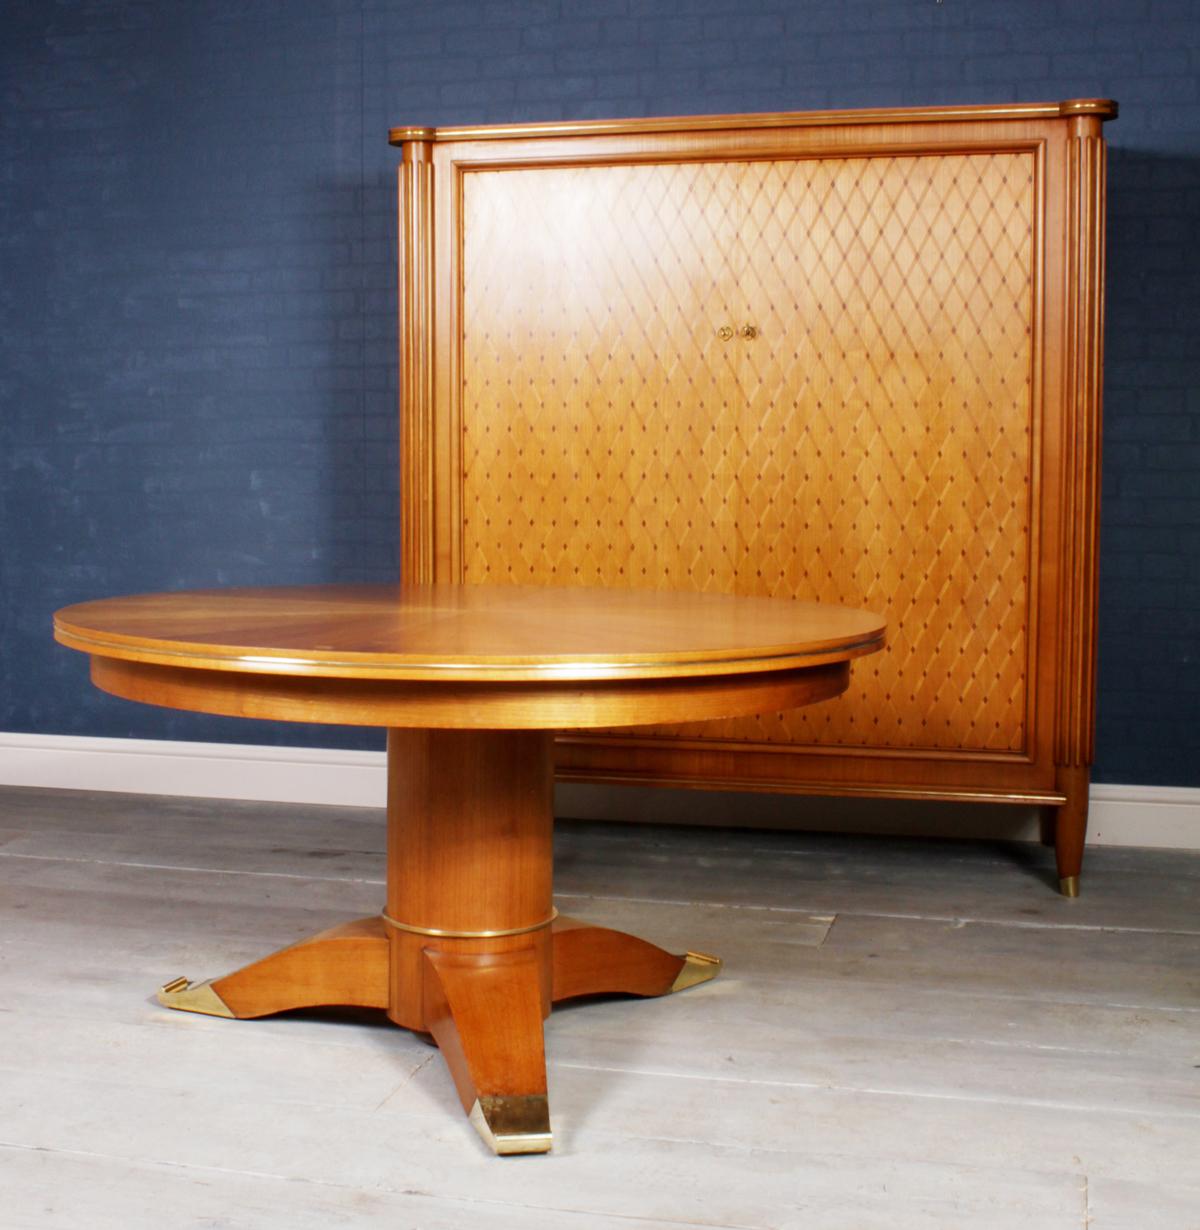 Pedestal table by Jules Leleu
A cherrywood segmented veneered pedestal table with polished bronze feet and trim produced by jules Leleu in 1956, model No. 28423 this table has a rising center so it can serve as a coffee table or a dining table,